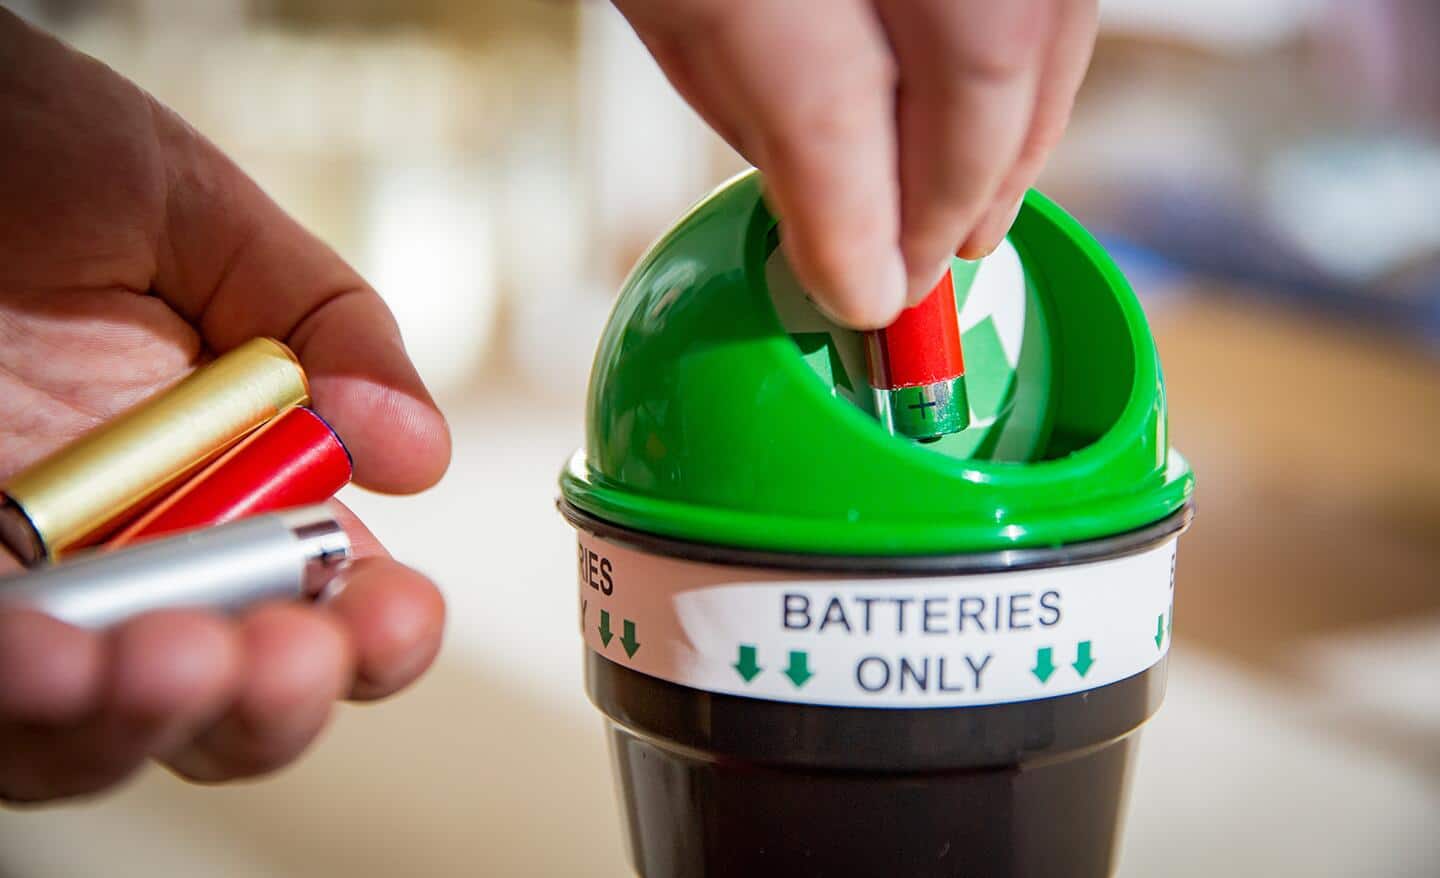 A person puts batteries into a tiny recycling container.